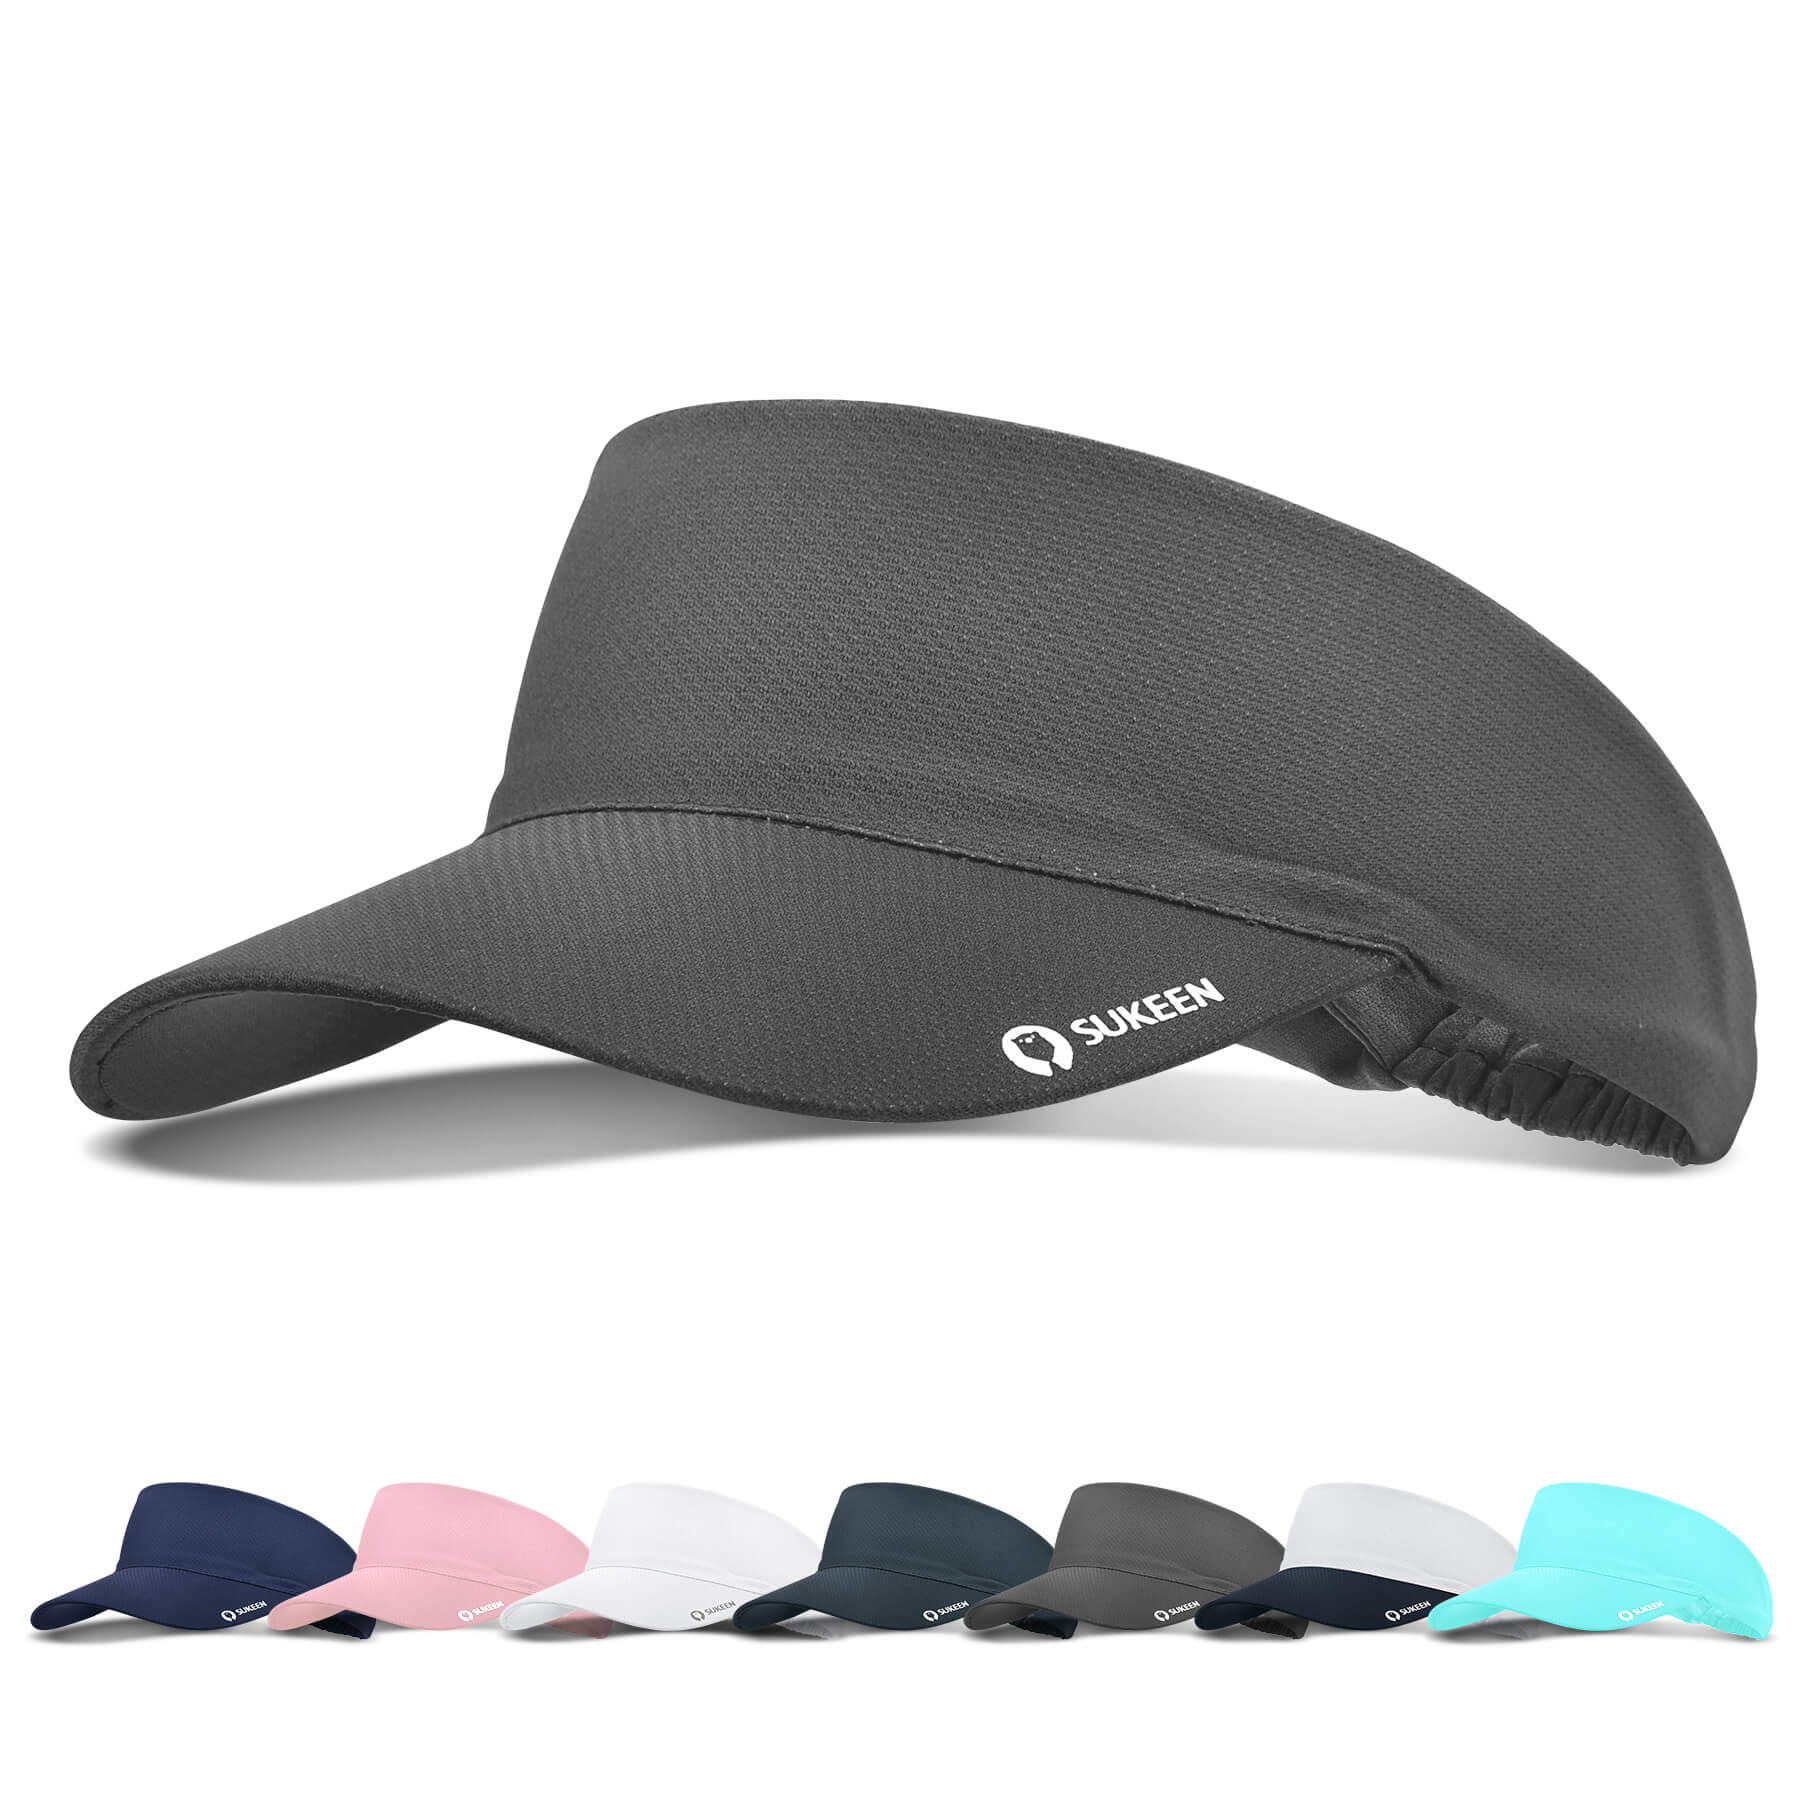 Sukeen Cooling Stretchy Visor Free Size Cool Hat